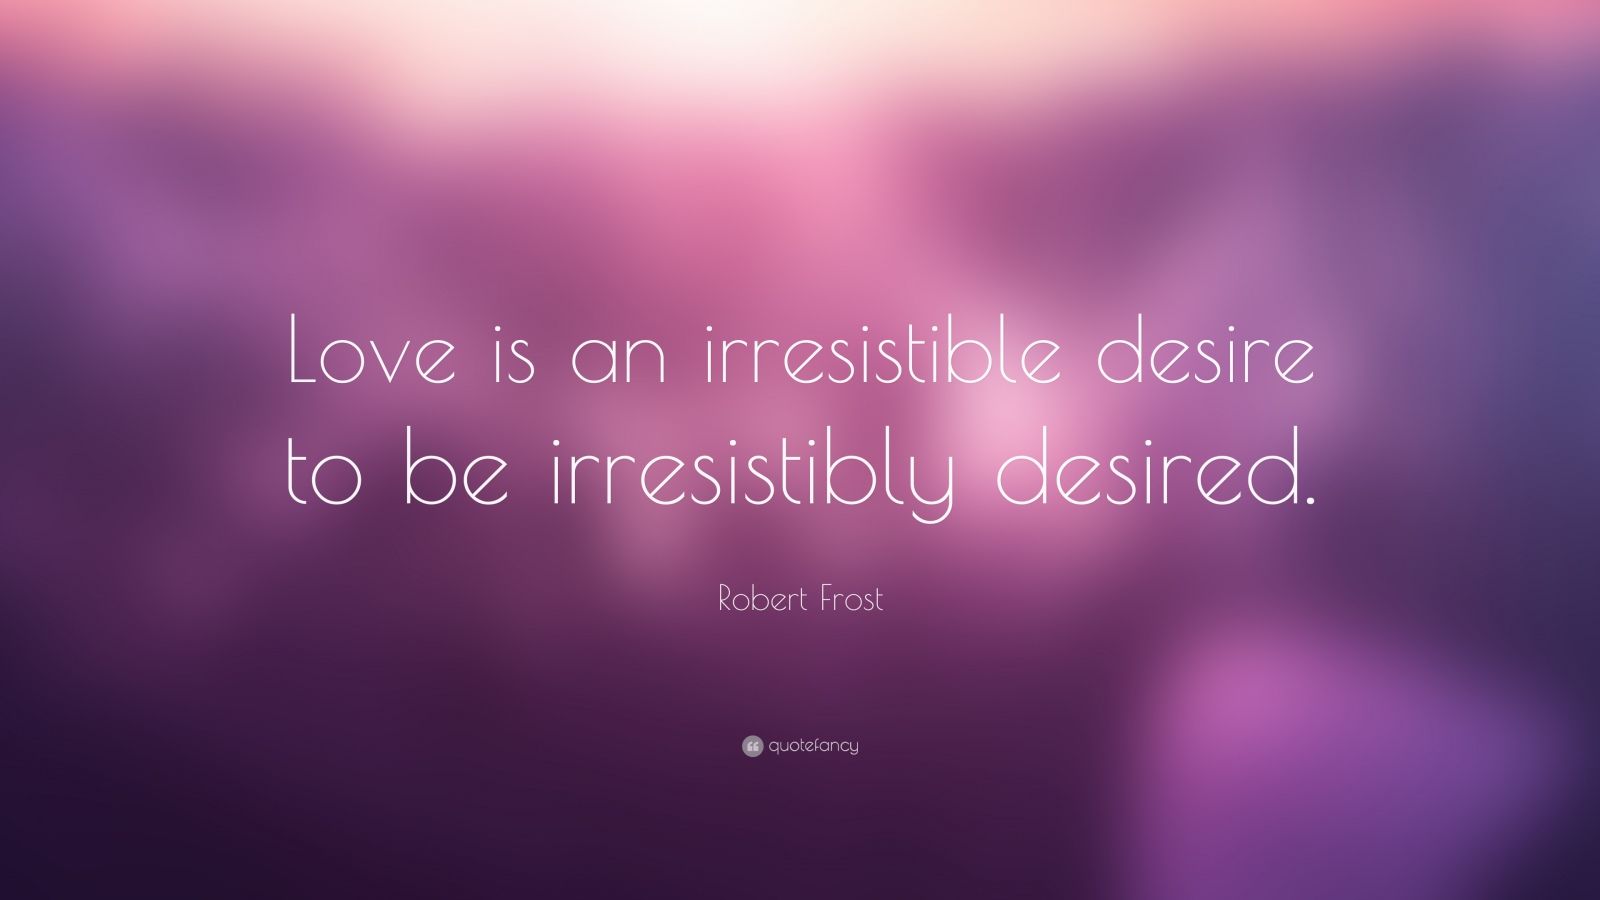 Robert Frost Quote “Love is an irresistible desire to be irresistibly desired ”